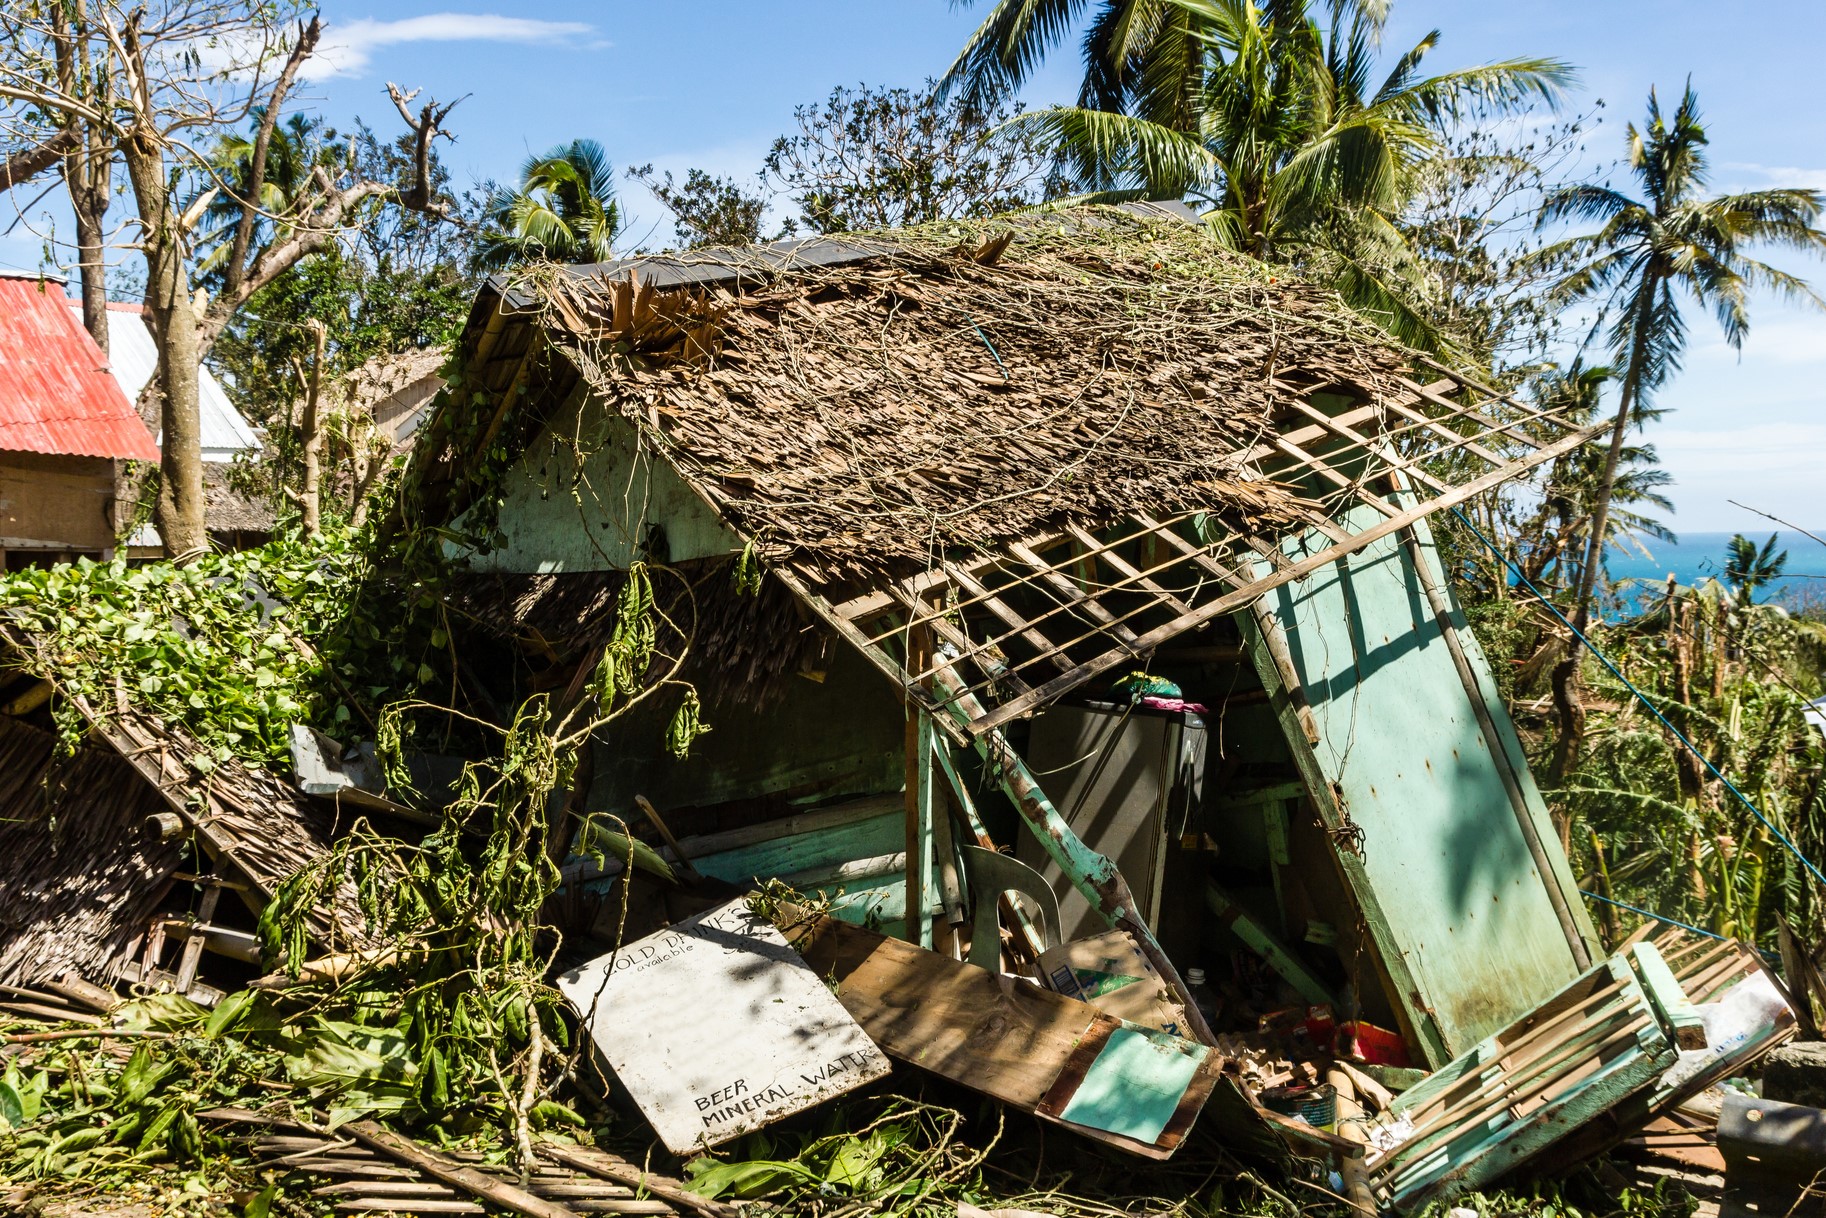 A photo of a wooden shack destroyed by Typhoon Haiyan in the Philippines with palm trees n the background